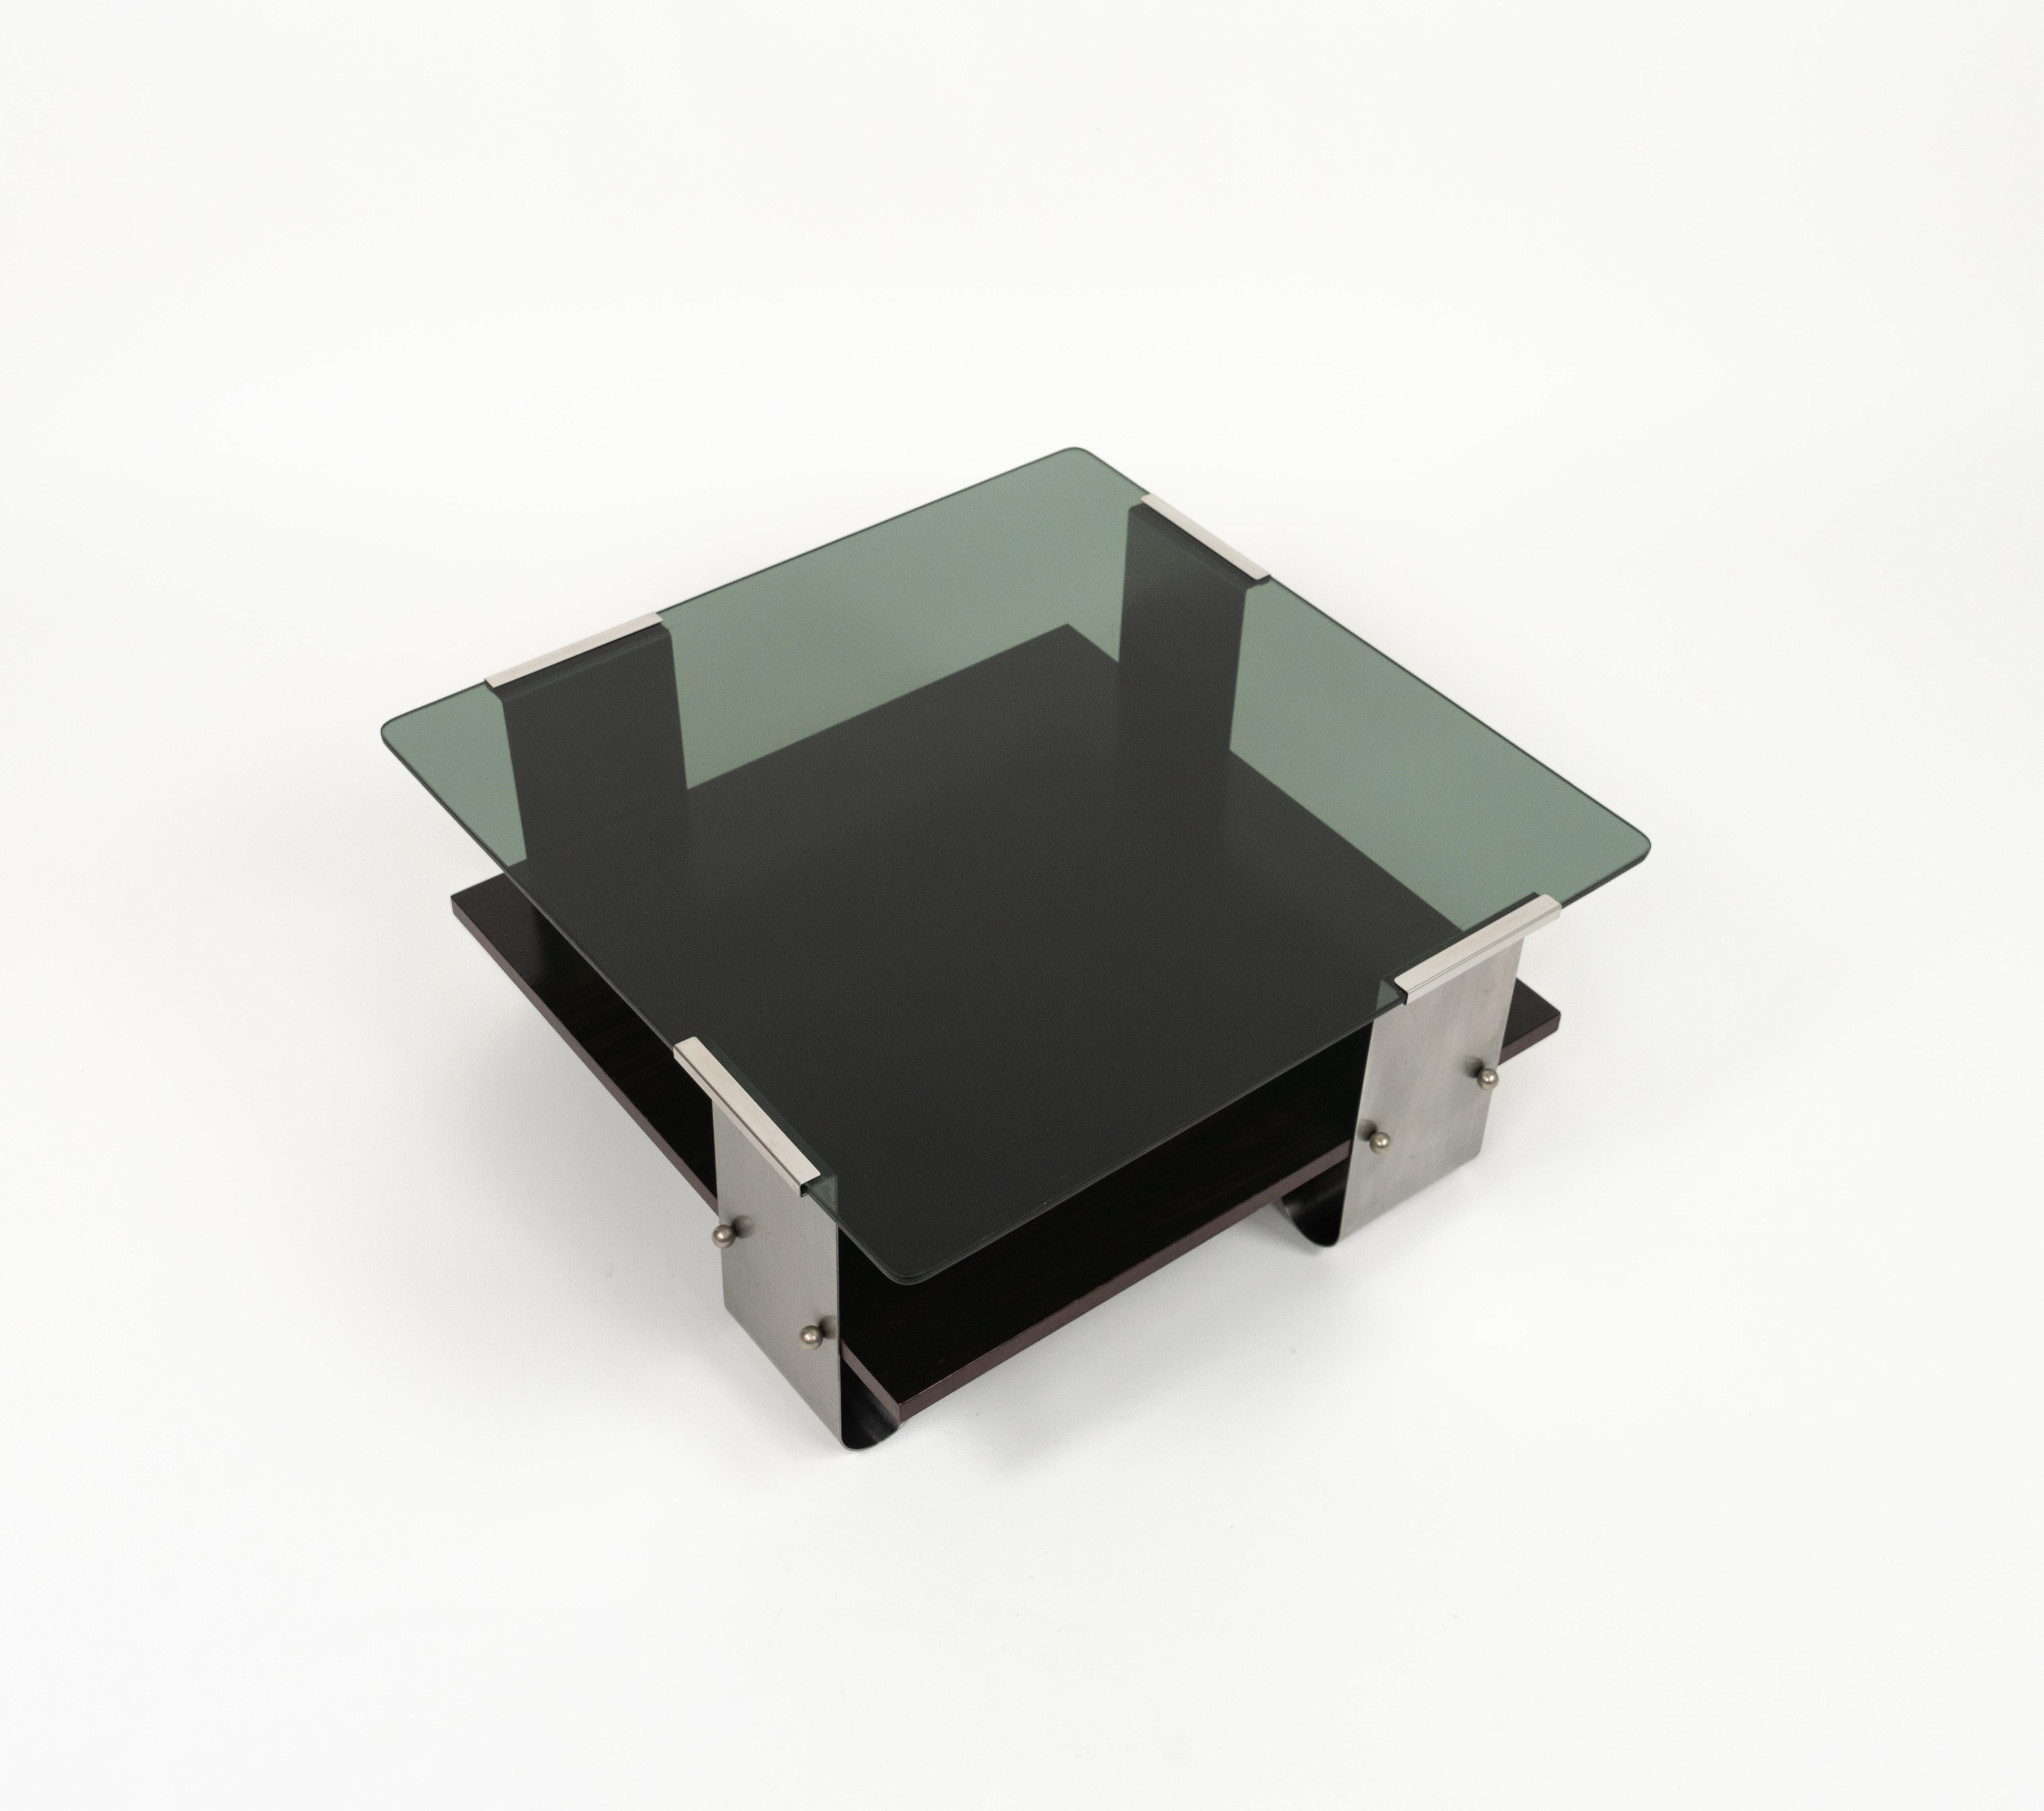 Midcentury Coffee Table in Steel, Wood & Glass by Francois Monnet, France, 1970s For Sale 5